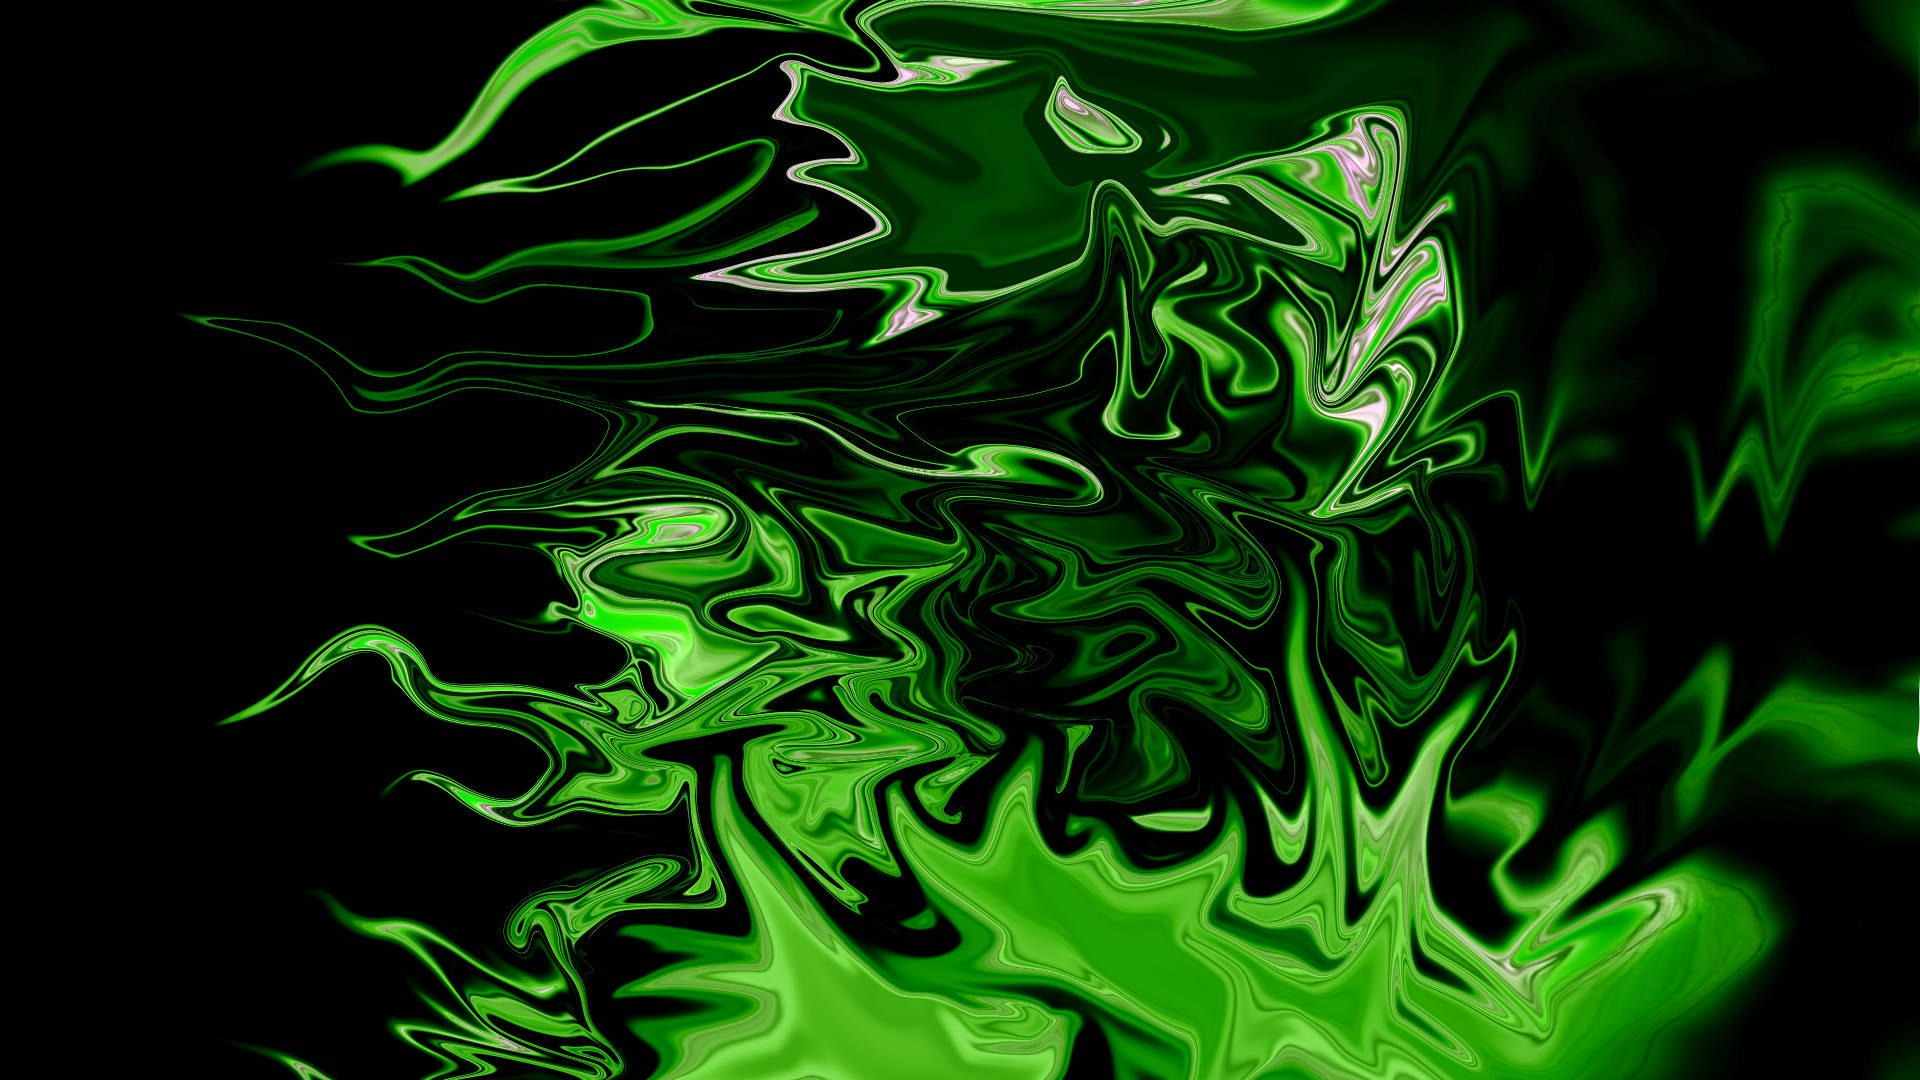 Caption: Green Fire Blooming From Hemp Leaf Background